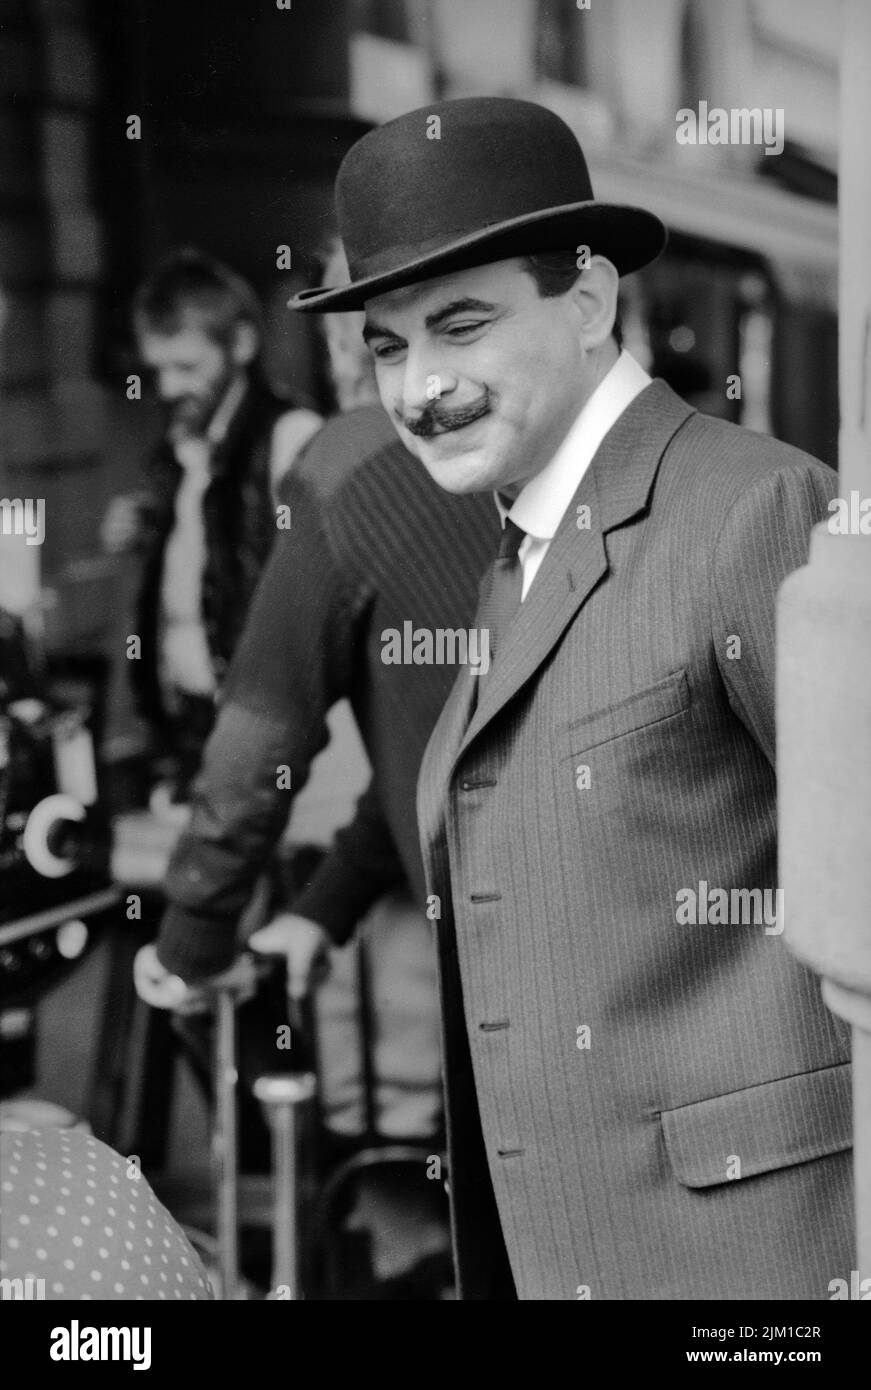 Brussels, Belgium - August 12, 1992: David Suchet actor on the set of - the chocolate box - Hercule Poirot at the Grand Place in Brussels Stock Photo